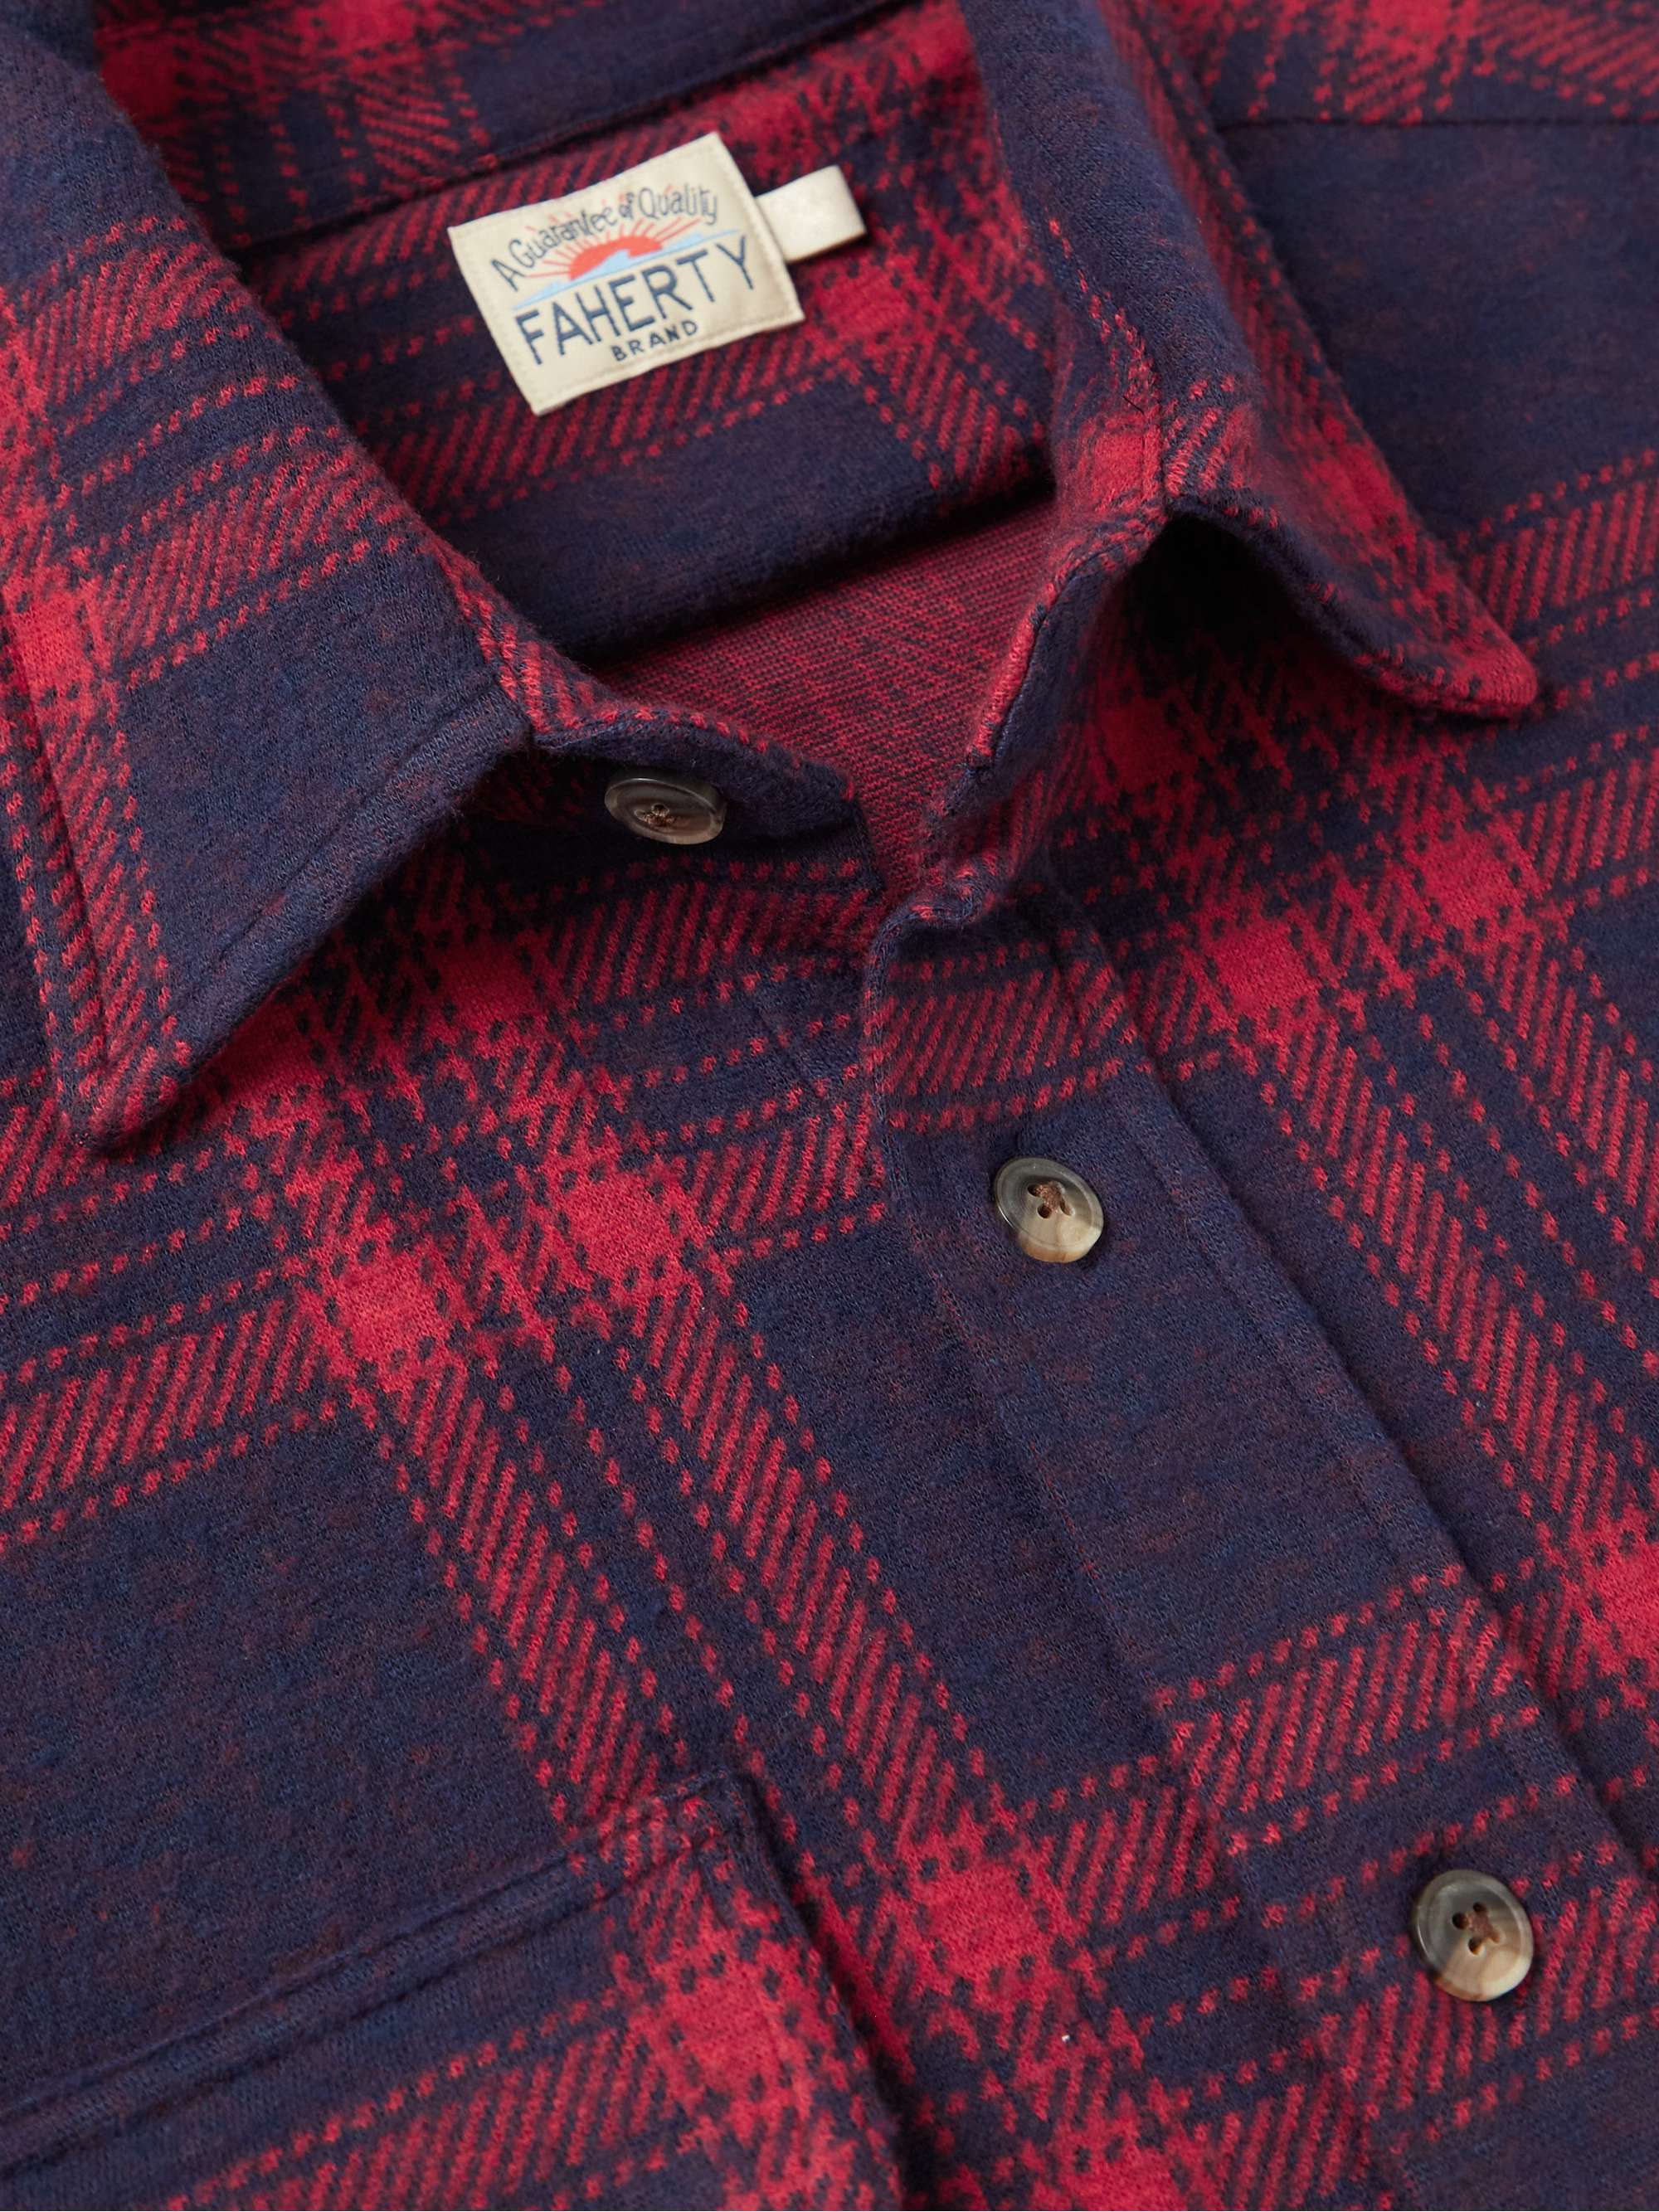 FAHERTY Legend Checked Flannel Shirt